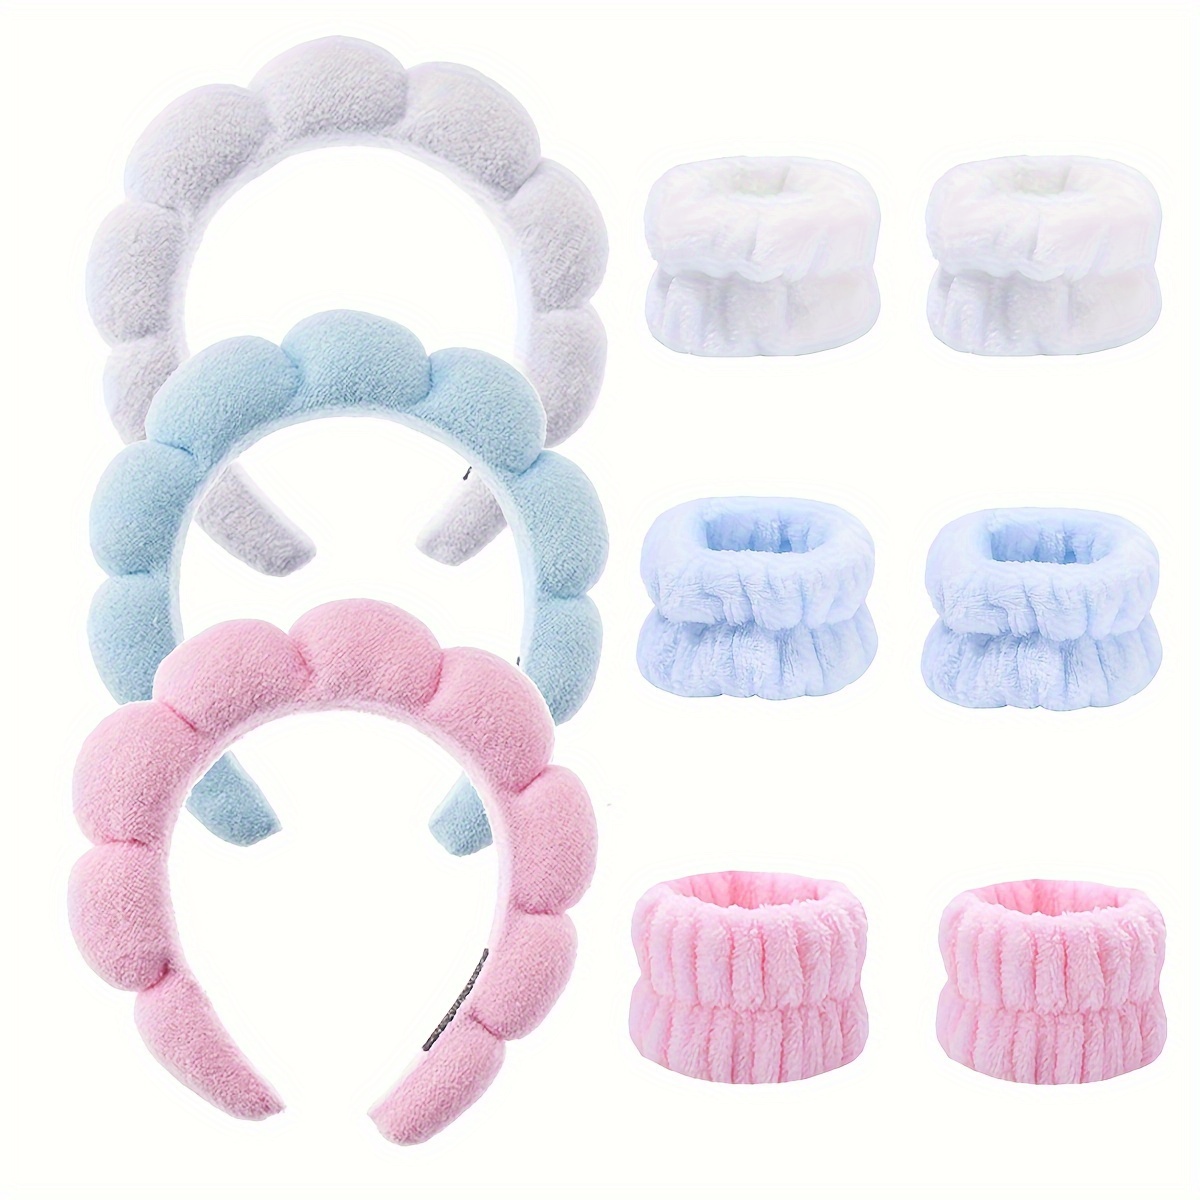 

3-piece Sweet Twist Headband Set With Elastic Wristbands - Soft Polyester, Perfect For Women's Spa, Makeup & Skincare